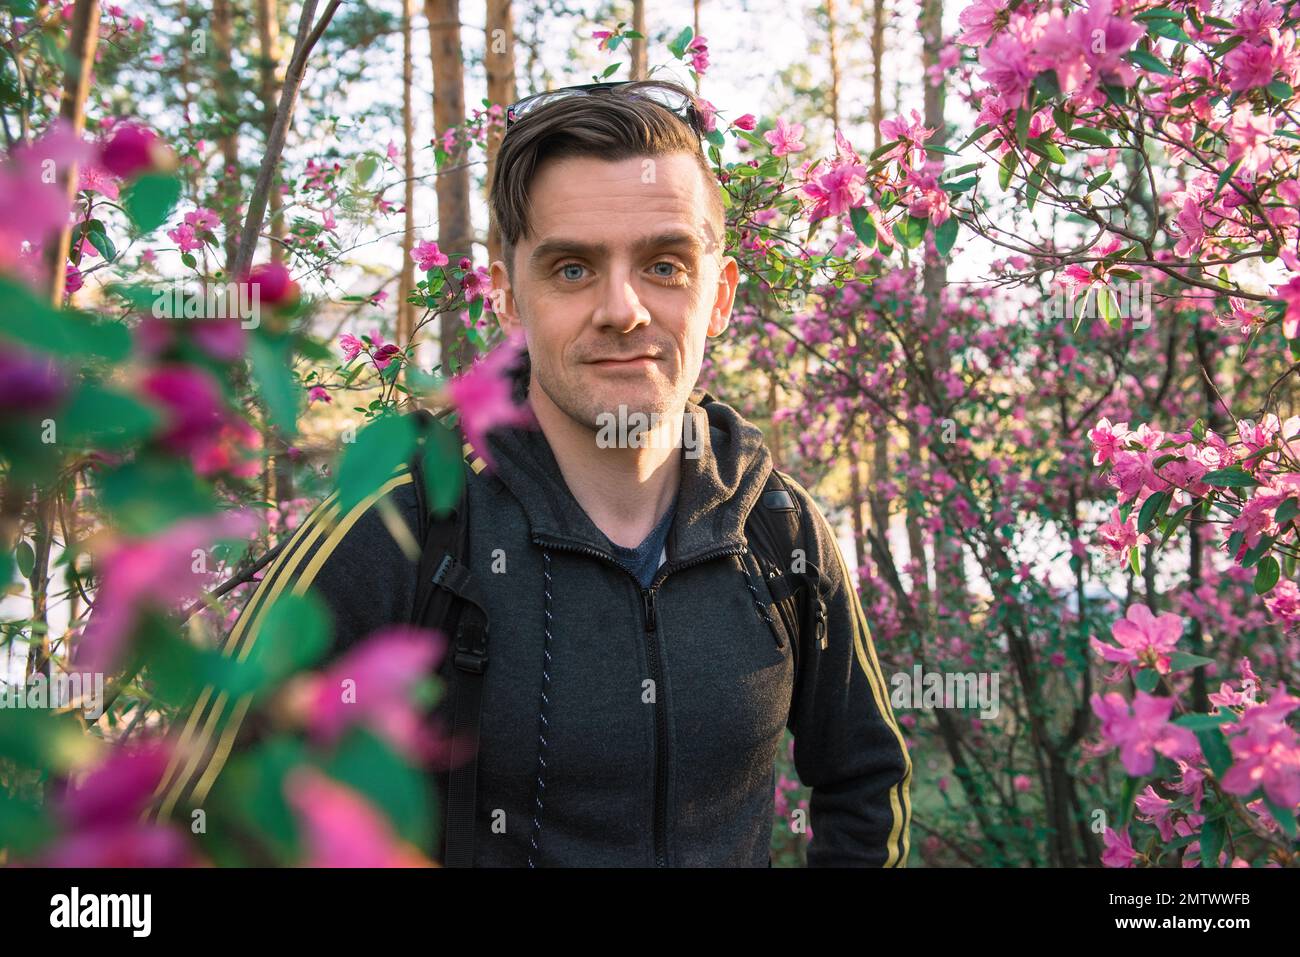 Man travelling in Altai mountains on spring beautiful booming pink Rhododendron flowers background Stock Photo